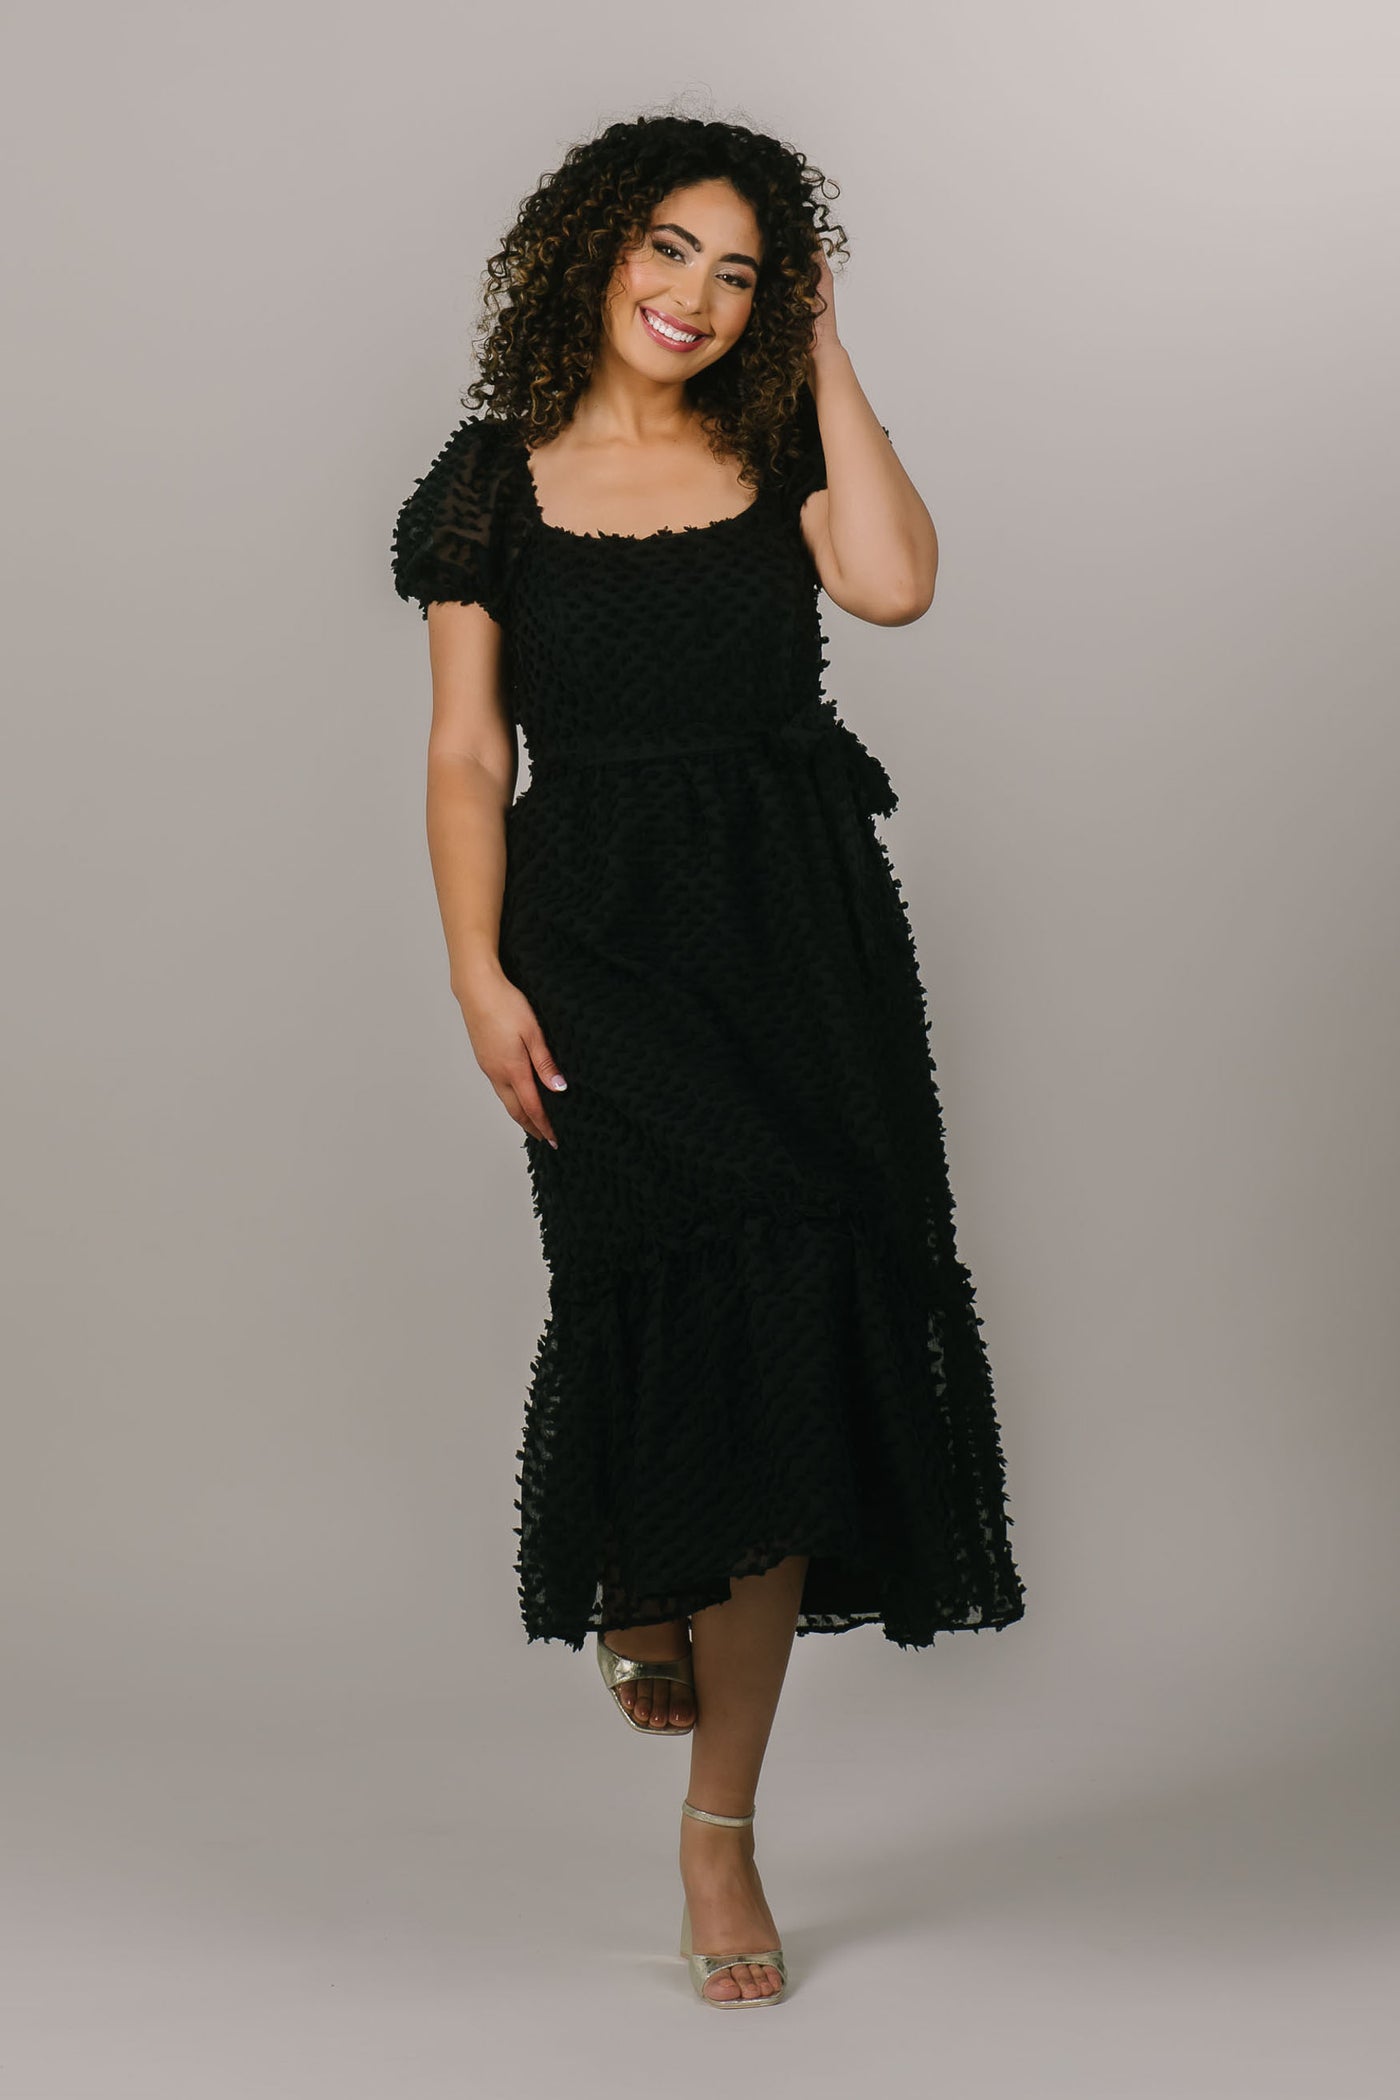 This is a modest black dress with polka dot details and a fun bow around the waist.